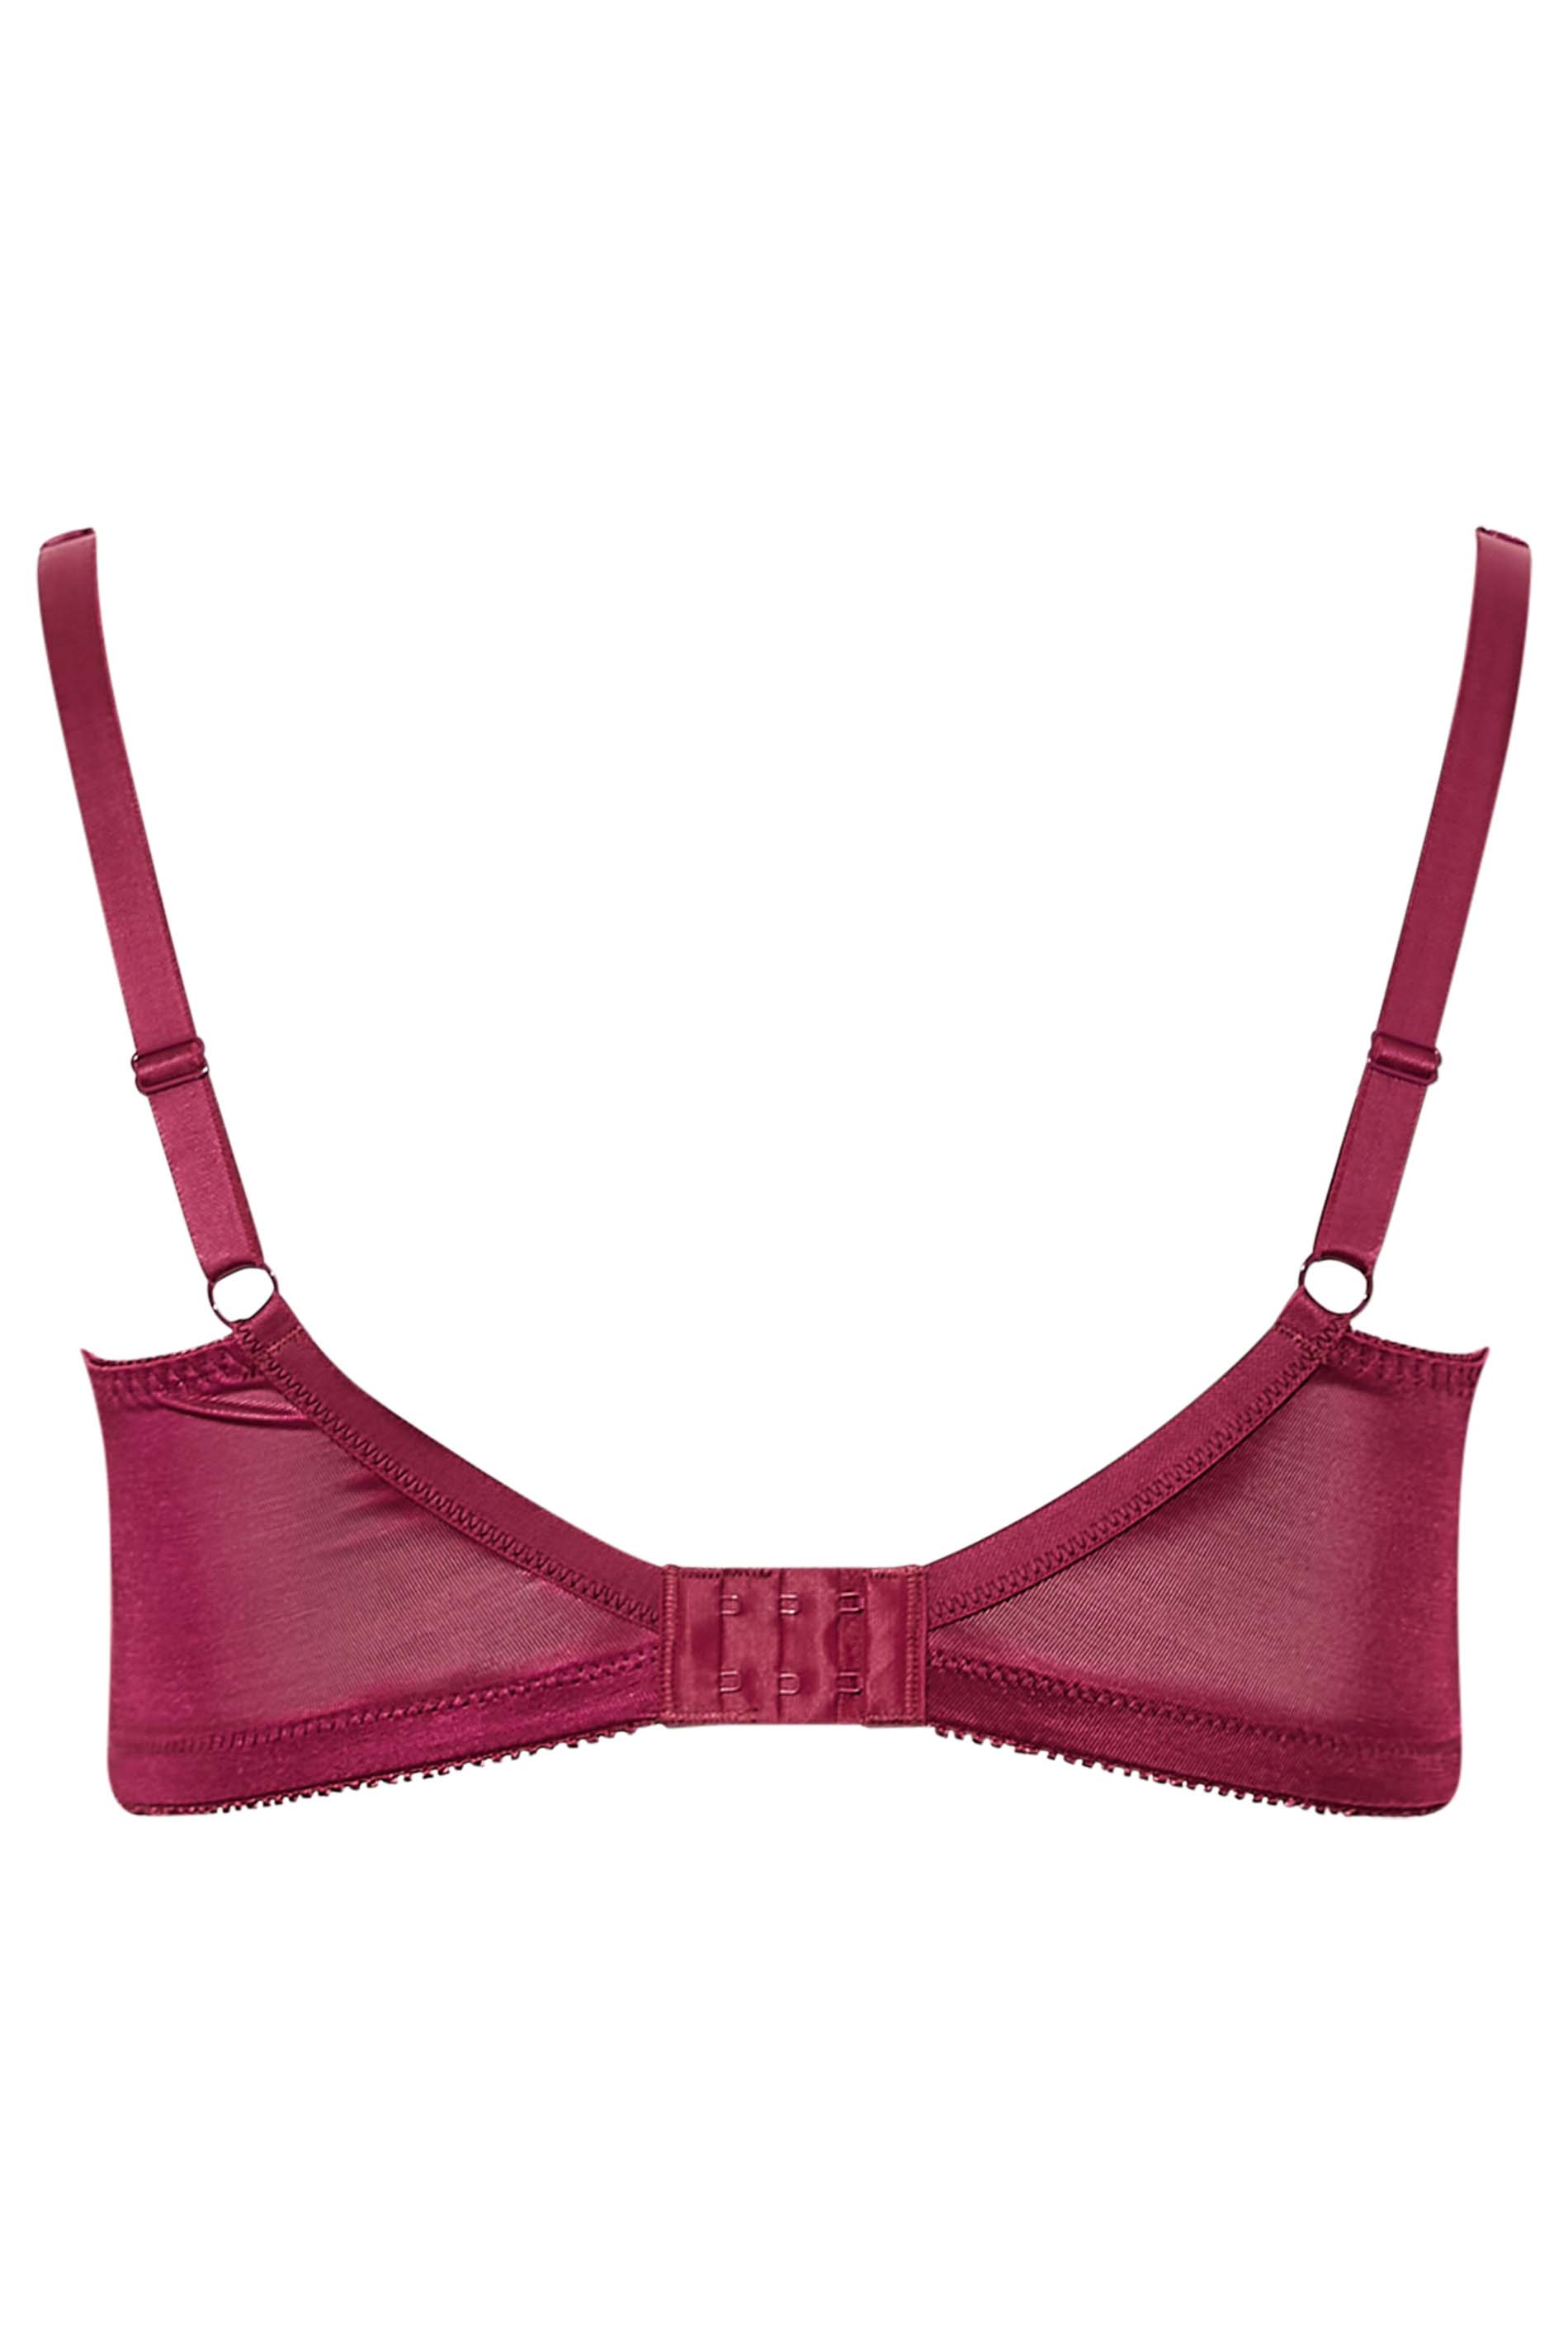 Buy Padded Non-Wired Full Cup Multiway Bra in Maroon - Lace Online